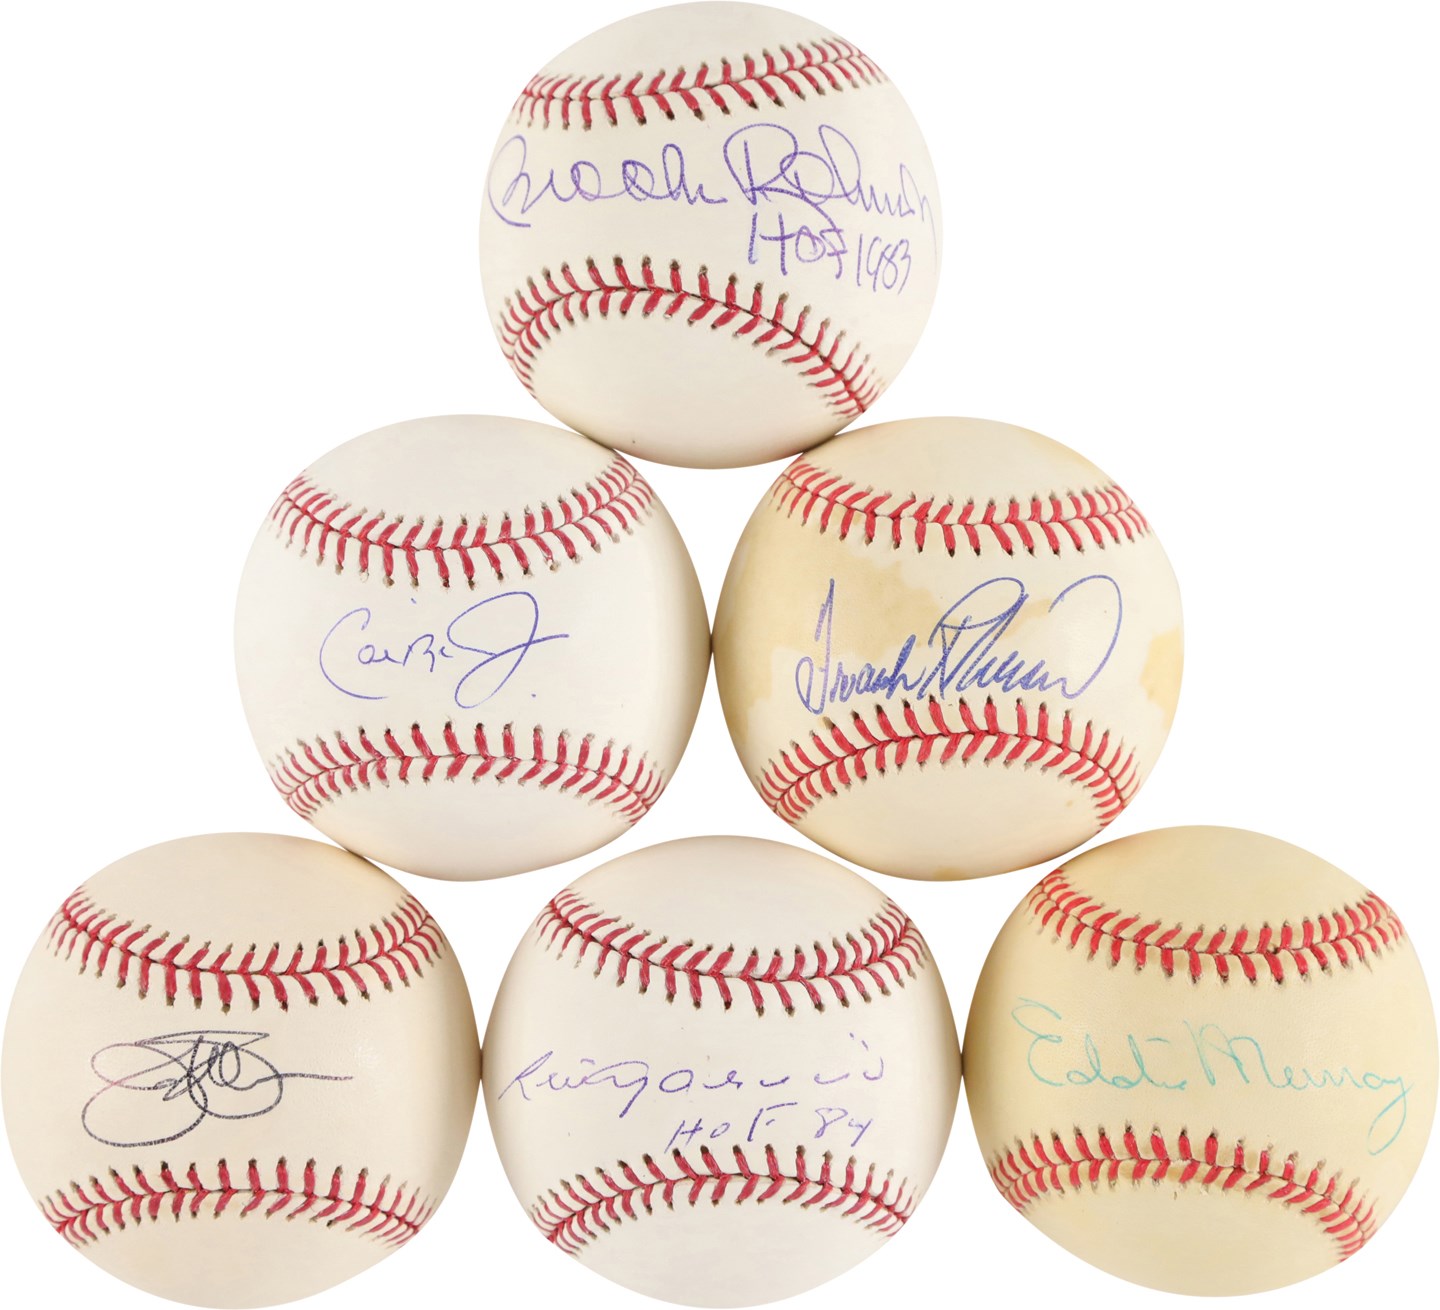 Baltimore Orioles Hall of Famers & Stars Signed Baseball Collection (45)